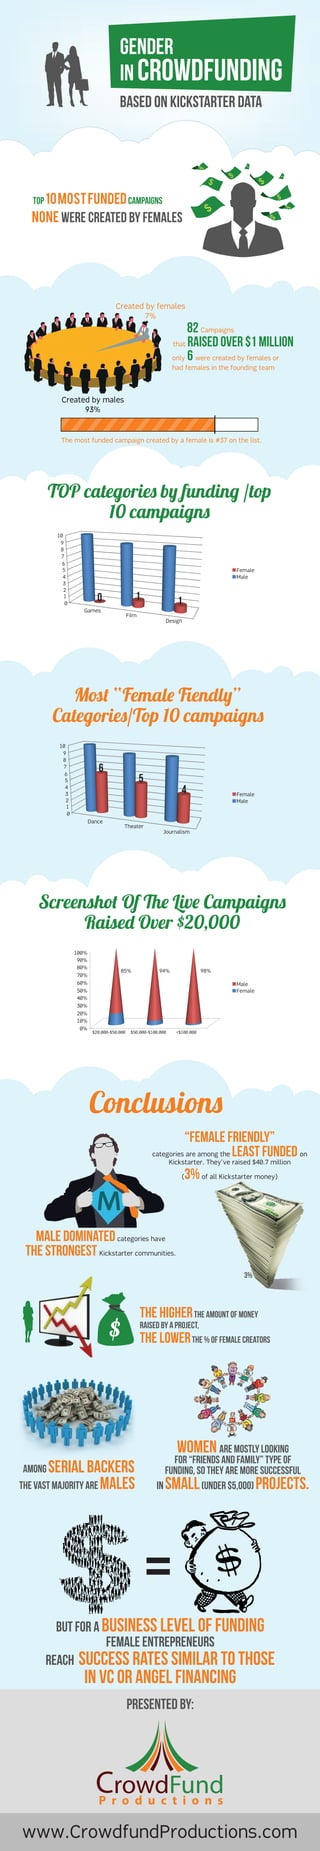 Top 10MostFundedCampaigns
none were created by females
$
$
$
$
$
$
$
$
$
$
82 Campaigns
only 6 were created by females or
had females in the founding team
that raised over $1 million
Created by females
7%
Created by males
93%
The most funded campaign created by a female is #37 on the list.
TOP categories by funding /top
10 campaigns
Most “Female Fiendly”
Categories/Top 10 campaigns
Screenshot Of The Live Campaigns
Raised Over $20,000
“Female friendly”
categories are among the least funded on
Kickstarter. They’ve raised $40.7 million
(3%of all Kickstarter money)
  Among serial backers
the vast majority are males
Women are mostly looking
for “friends and family” type of
funding, so they are more successful
in small(under $5,000) projects.
MM
3%
Gender
in Crowdfunding
Based on Kickstarter DATA
Conclusions
Male dominatedcategories have
the strongest Kickstarter communities.
$
The higherthe amount of money
raised by a project,
the lowerthe % of female creators
But for a business level of funding
female entrepreneurs
reach success rates similar to those
in VC or angel financing
Games
10
9
8
7
6
5
4
3
2
1
0
Film
Design
0 1 1
=
Dance
Theater
Journalism
6
5
4
10
9
8
7
6
5
4
3
2
1
0
100%
85% 94% 98%
90%
80%
70%
60%
50%
40%
30%
20%
10%
0%
$20,000-$50,000 $50,000-$100,000 <$100,000
Female
Male
Male
Female
Female
Male
www.CrowdfundProductions.com
Presented by:
 